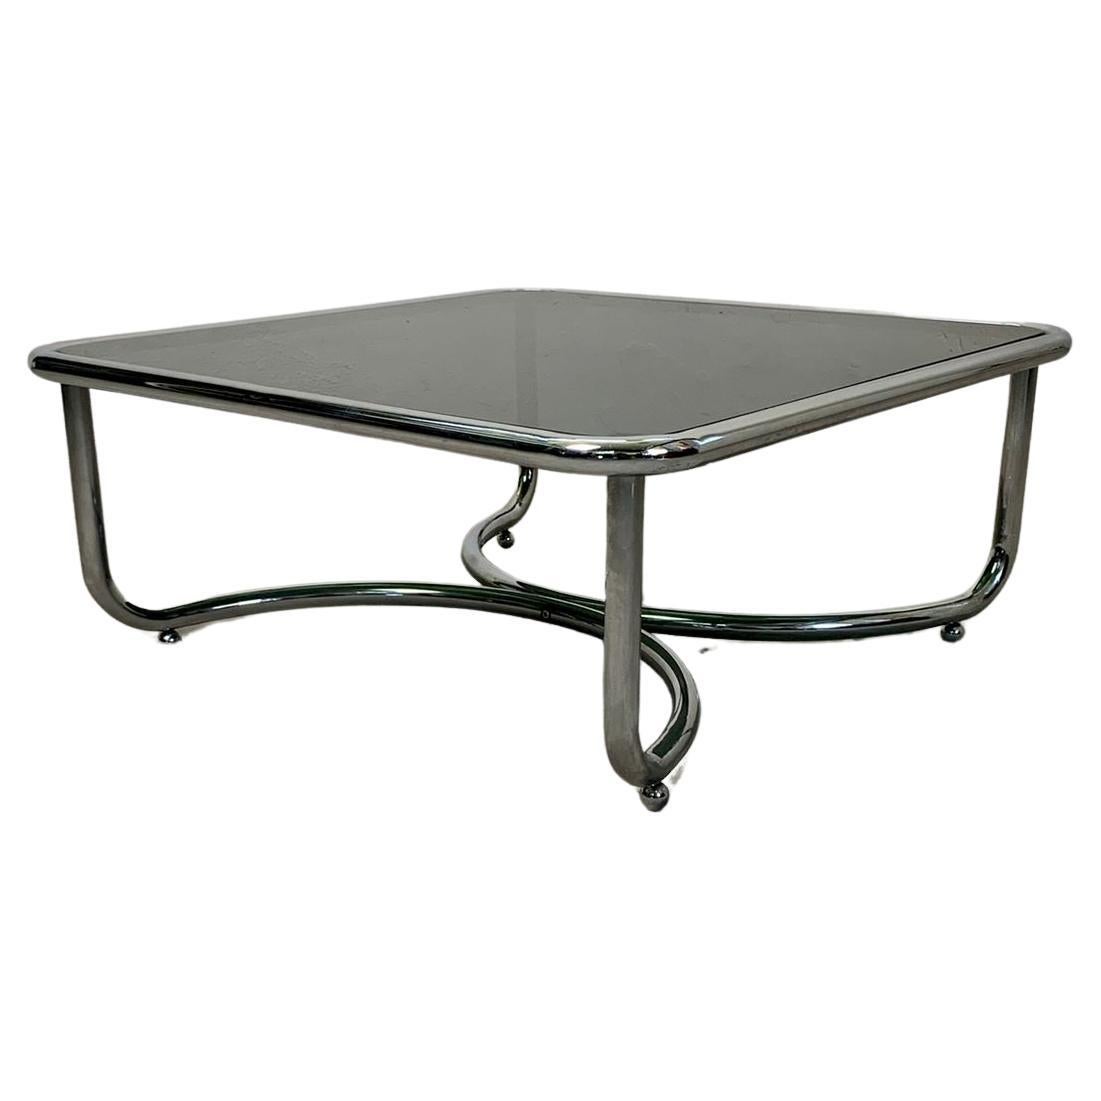 Low table with smoked glass top and chromed structure, Gae Aulenti, Poltronova For Sale